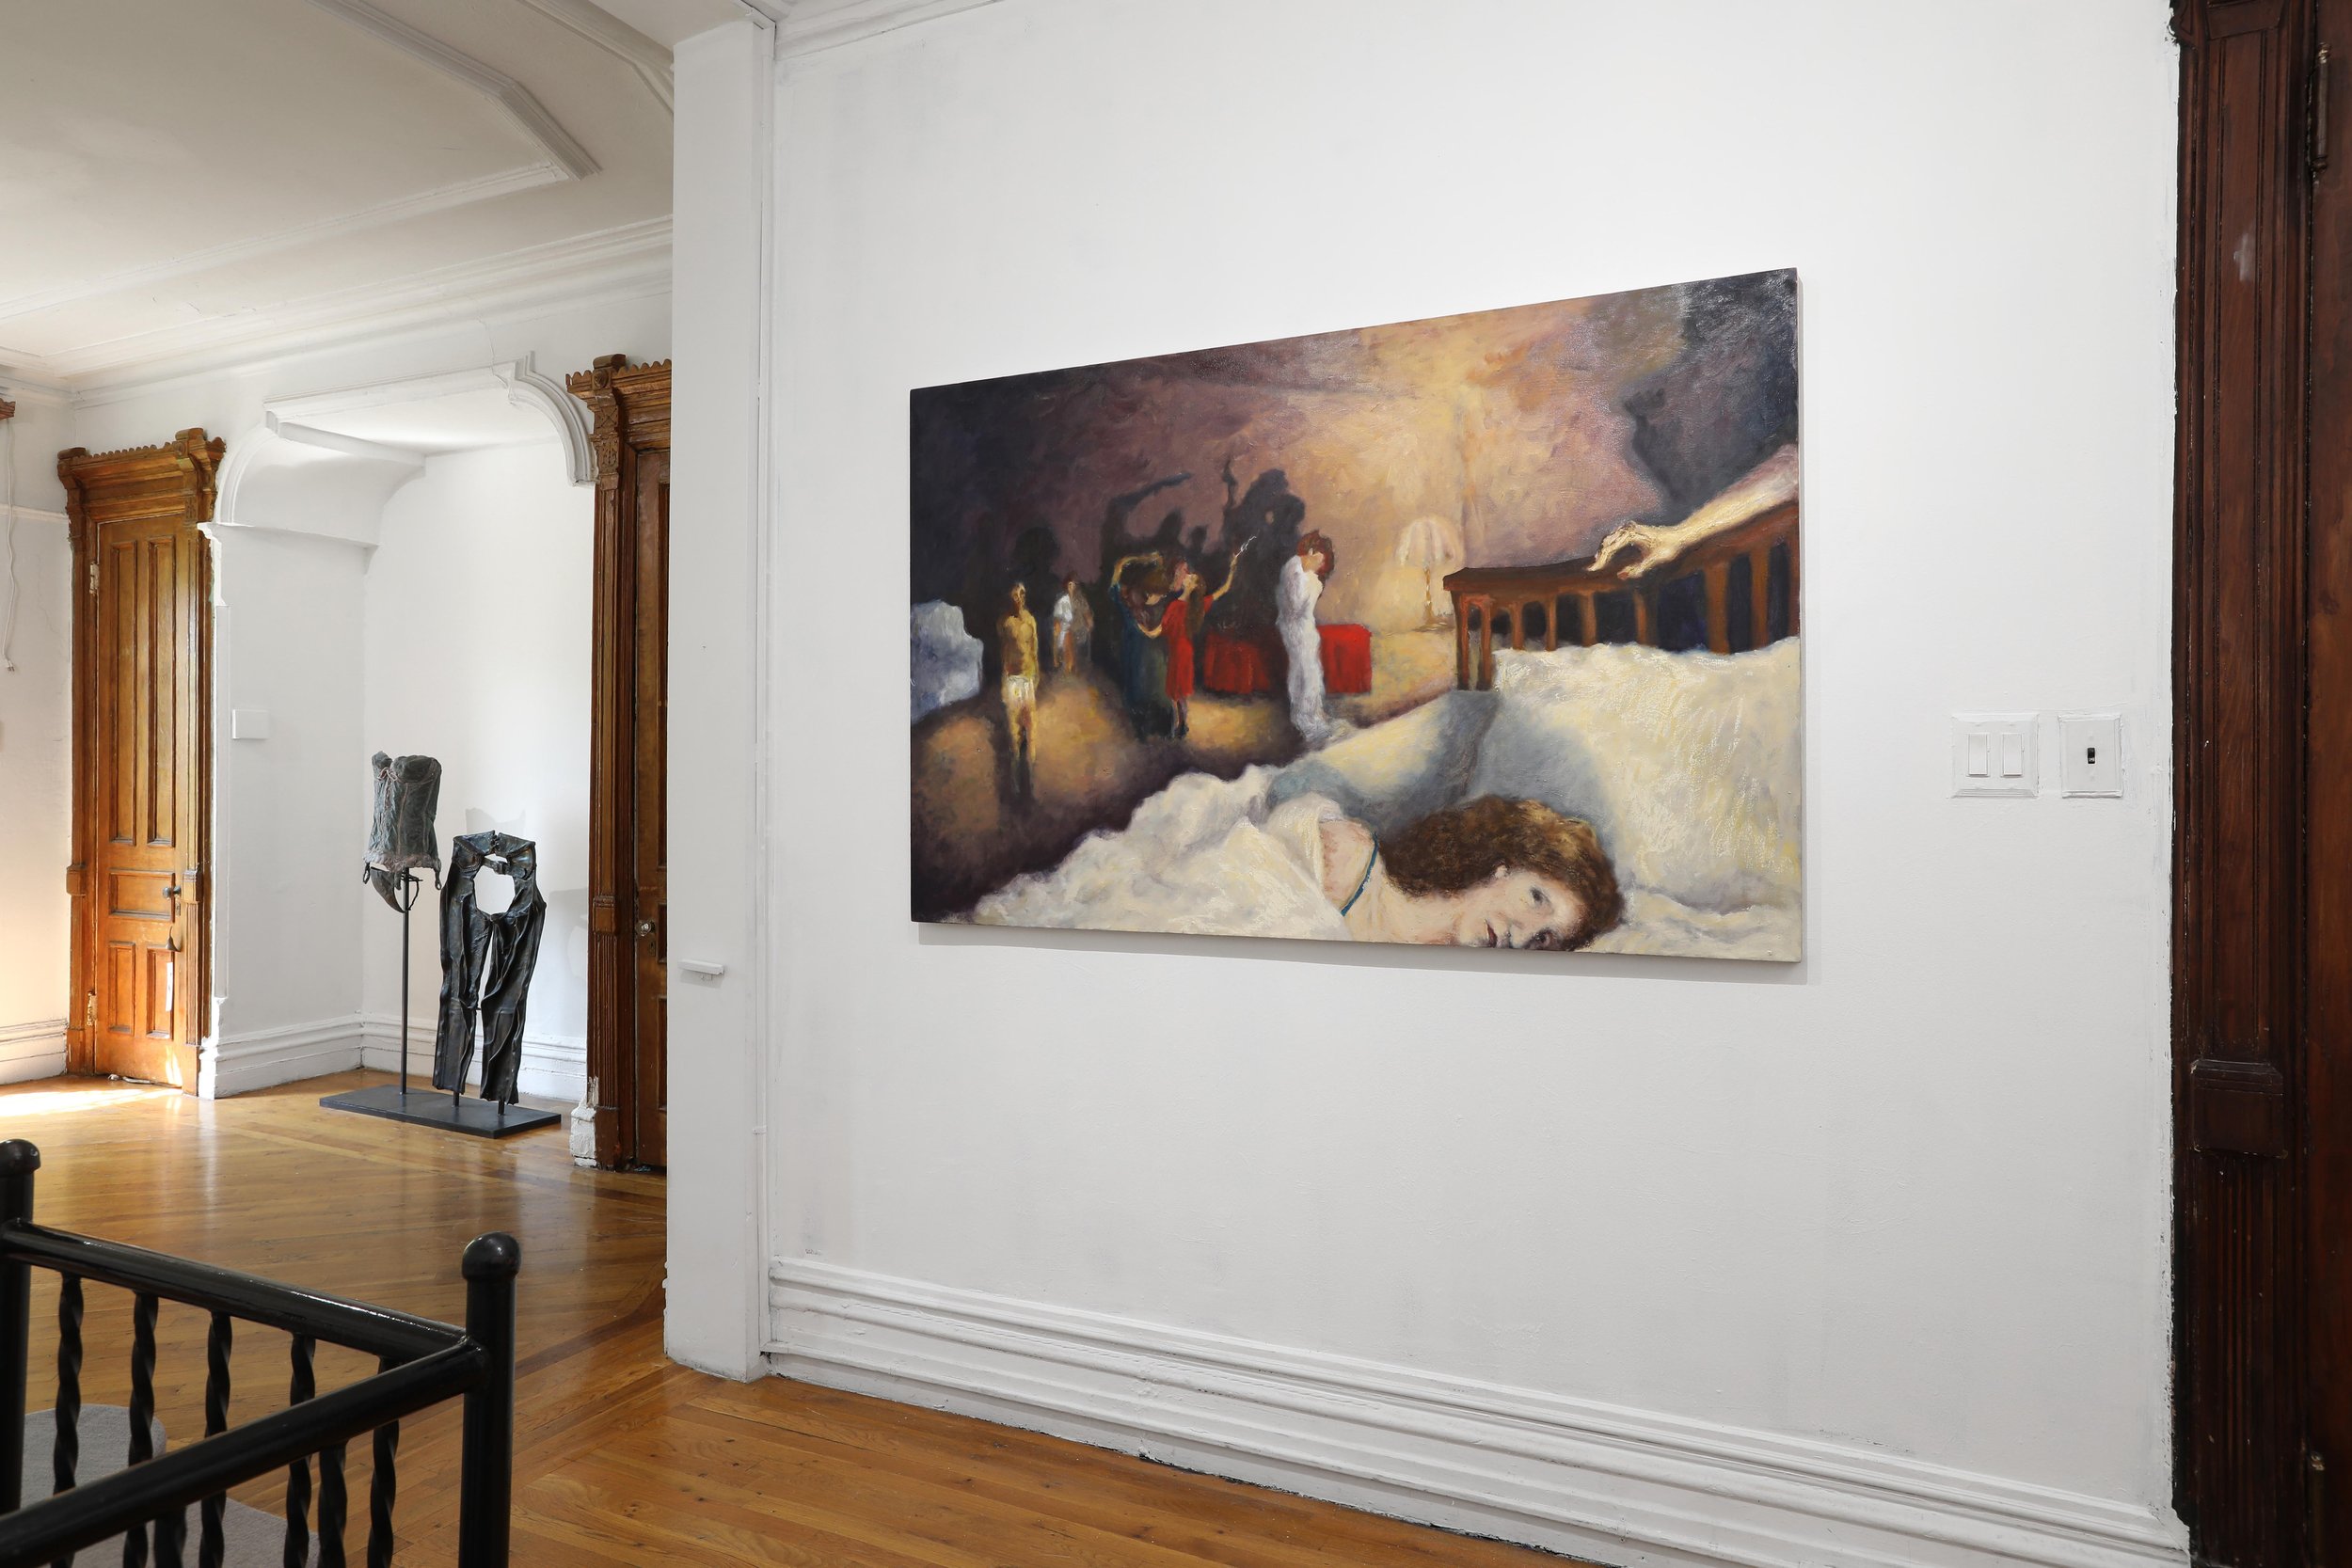  Installation view of  Interest in Humanity: Portraits of Yesterday and Today , photo by Ken Lee, courtesy of Fou Gallery 